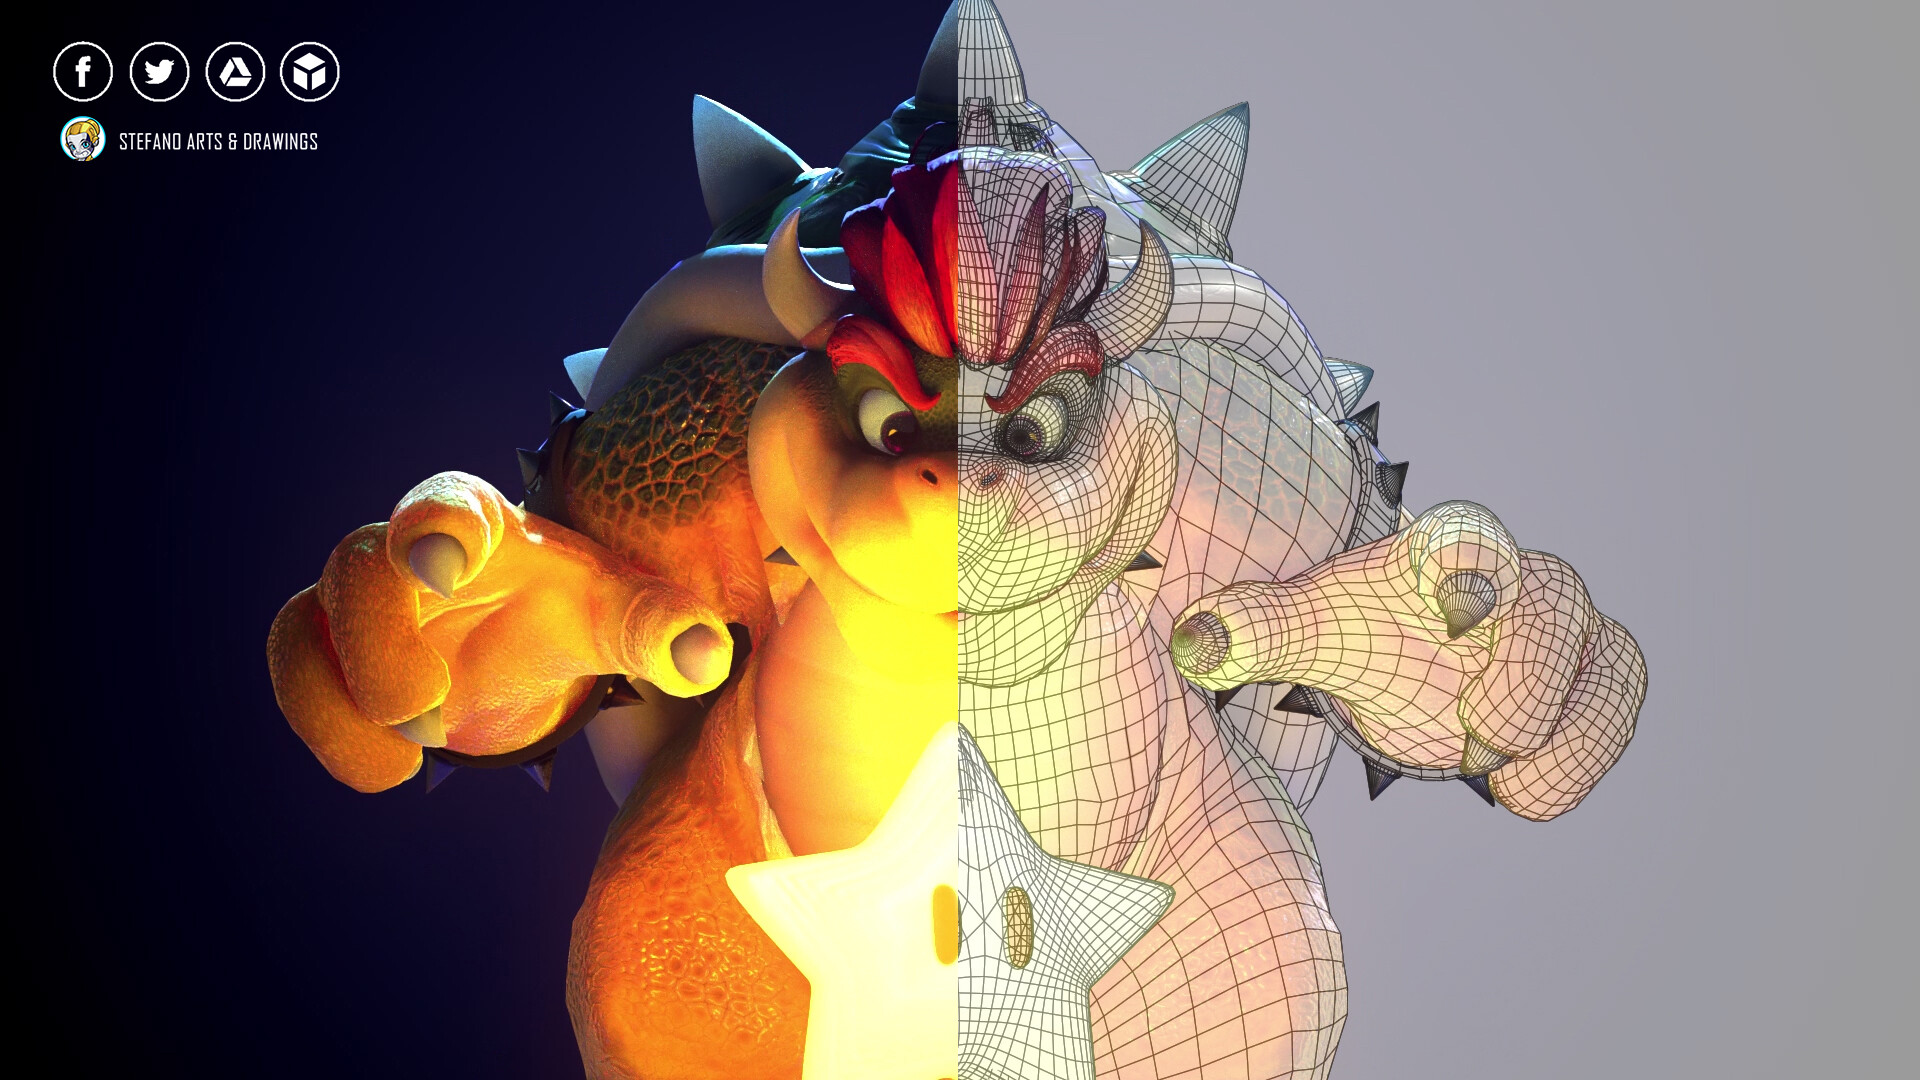 MARIO MOVIE's BOWSER - Fan Homage (LowPoly) - 3D model by Stefano